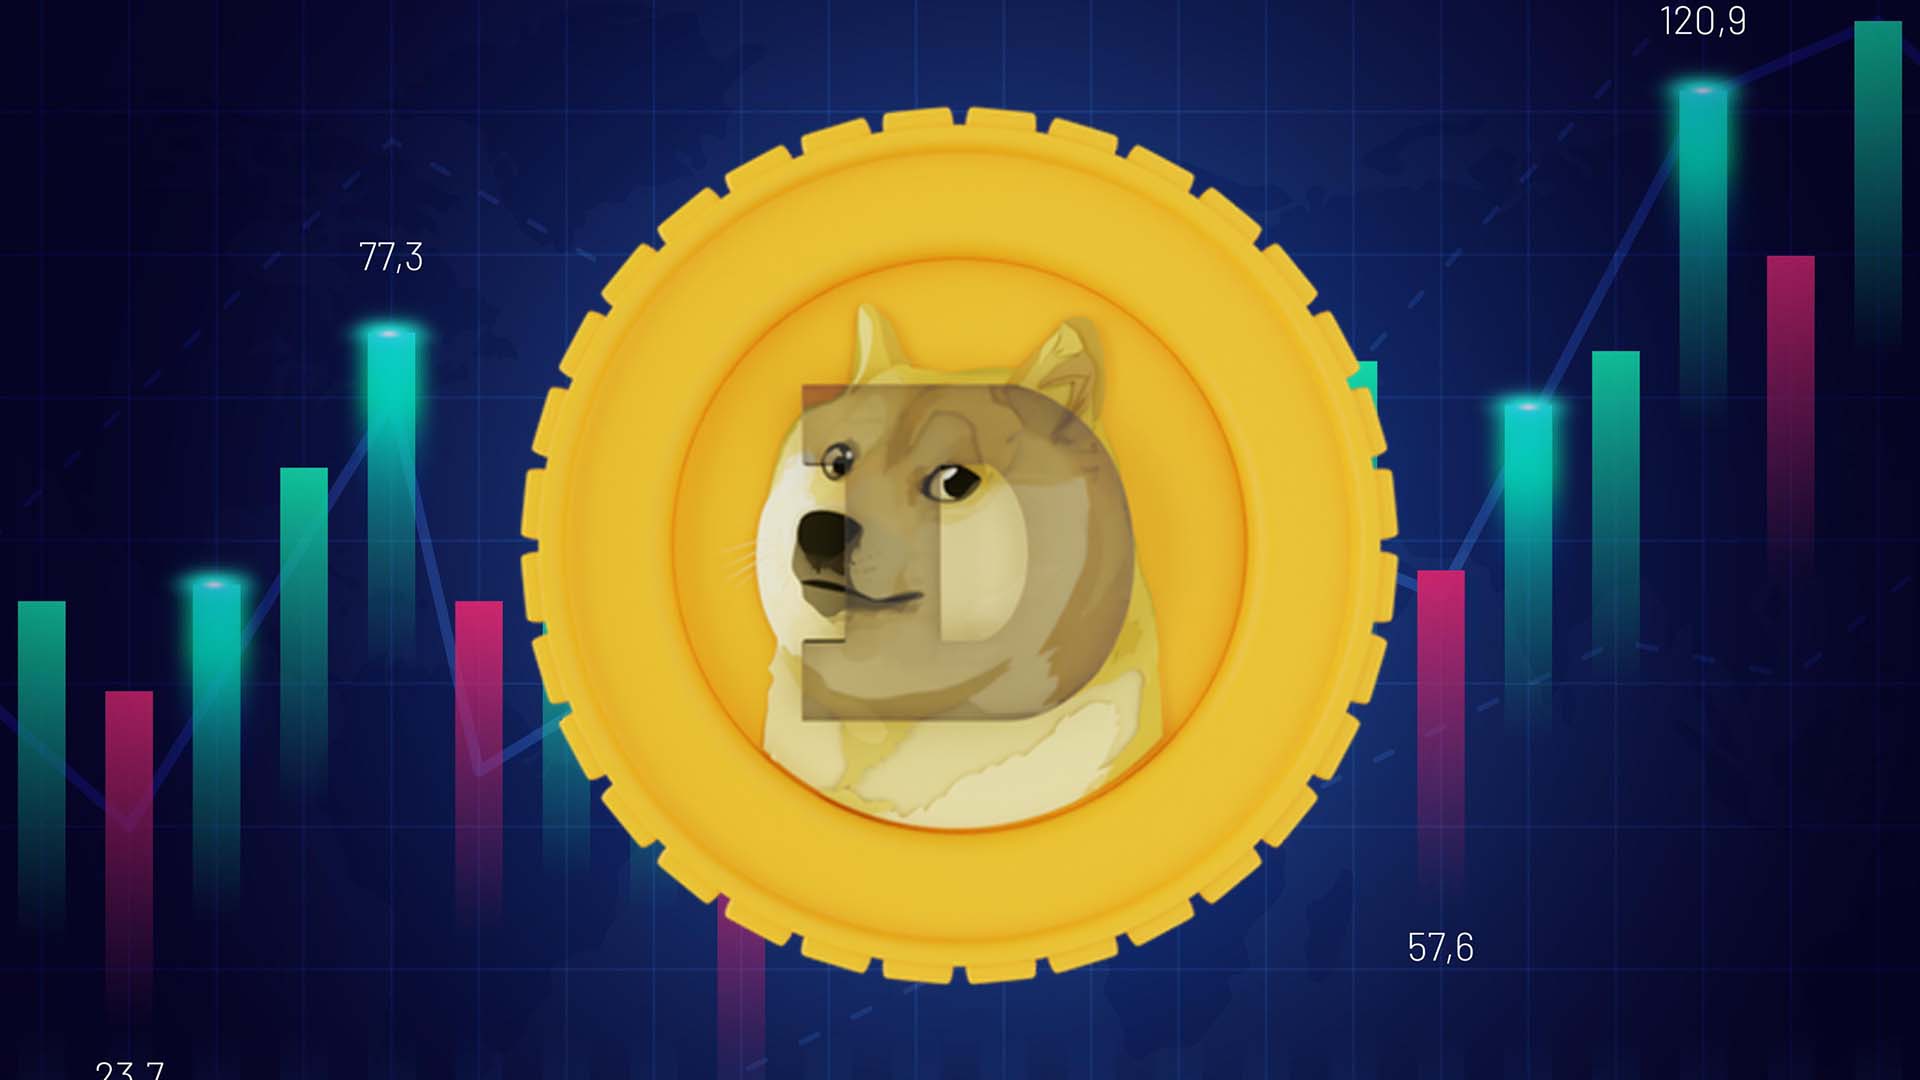 DOGE investors to welcome Santa for Christmas- festive bells to ring soon